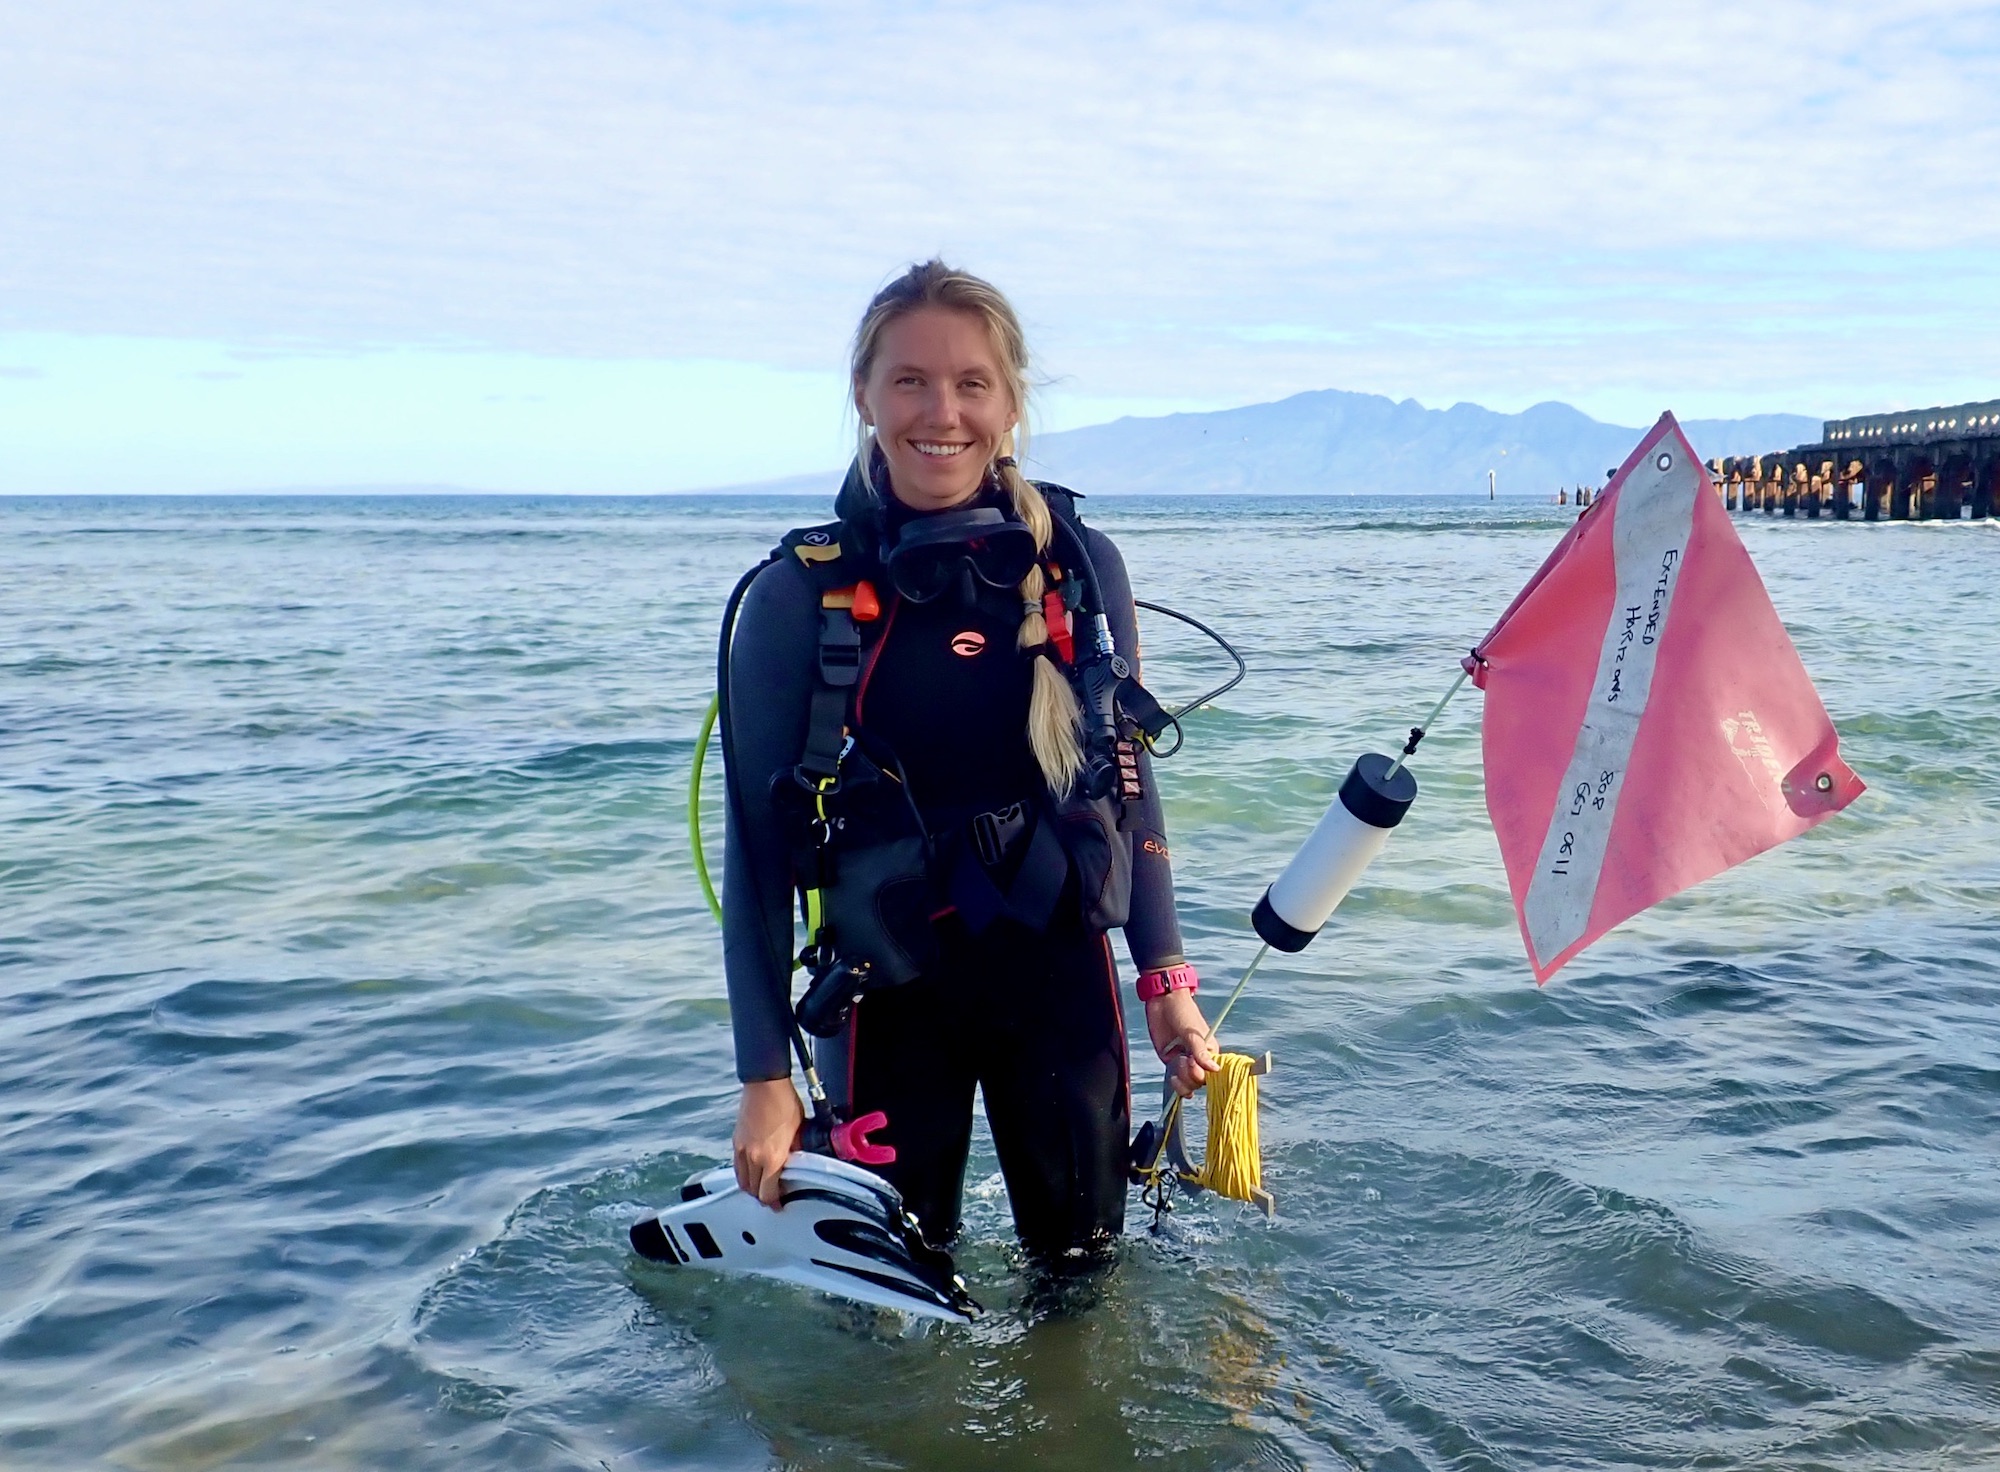 Jessica stands in the ocean wearing and carrying dive gear